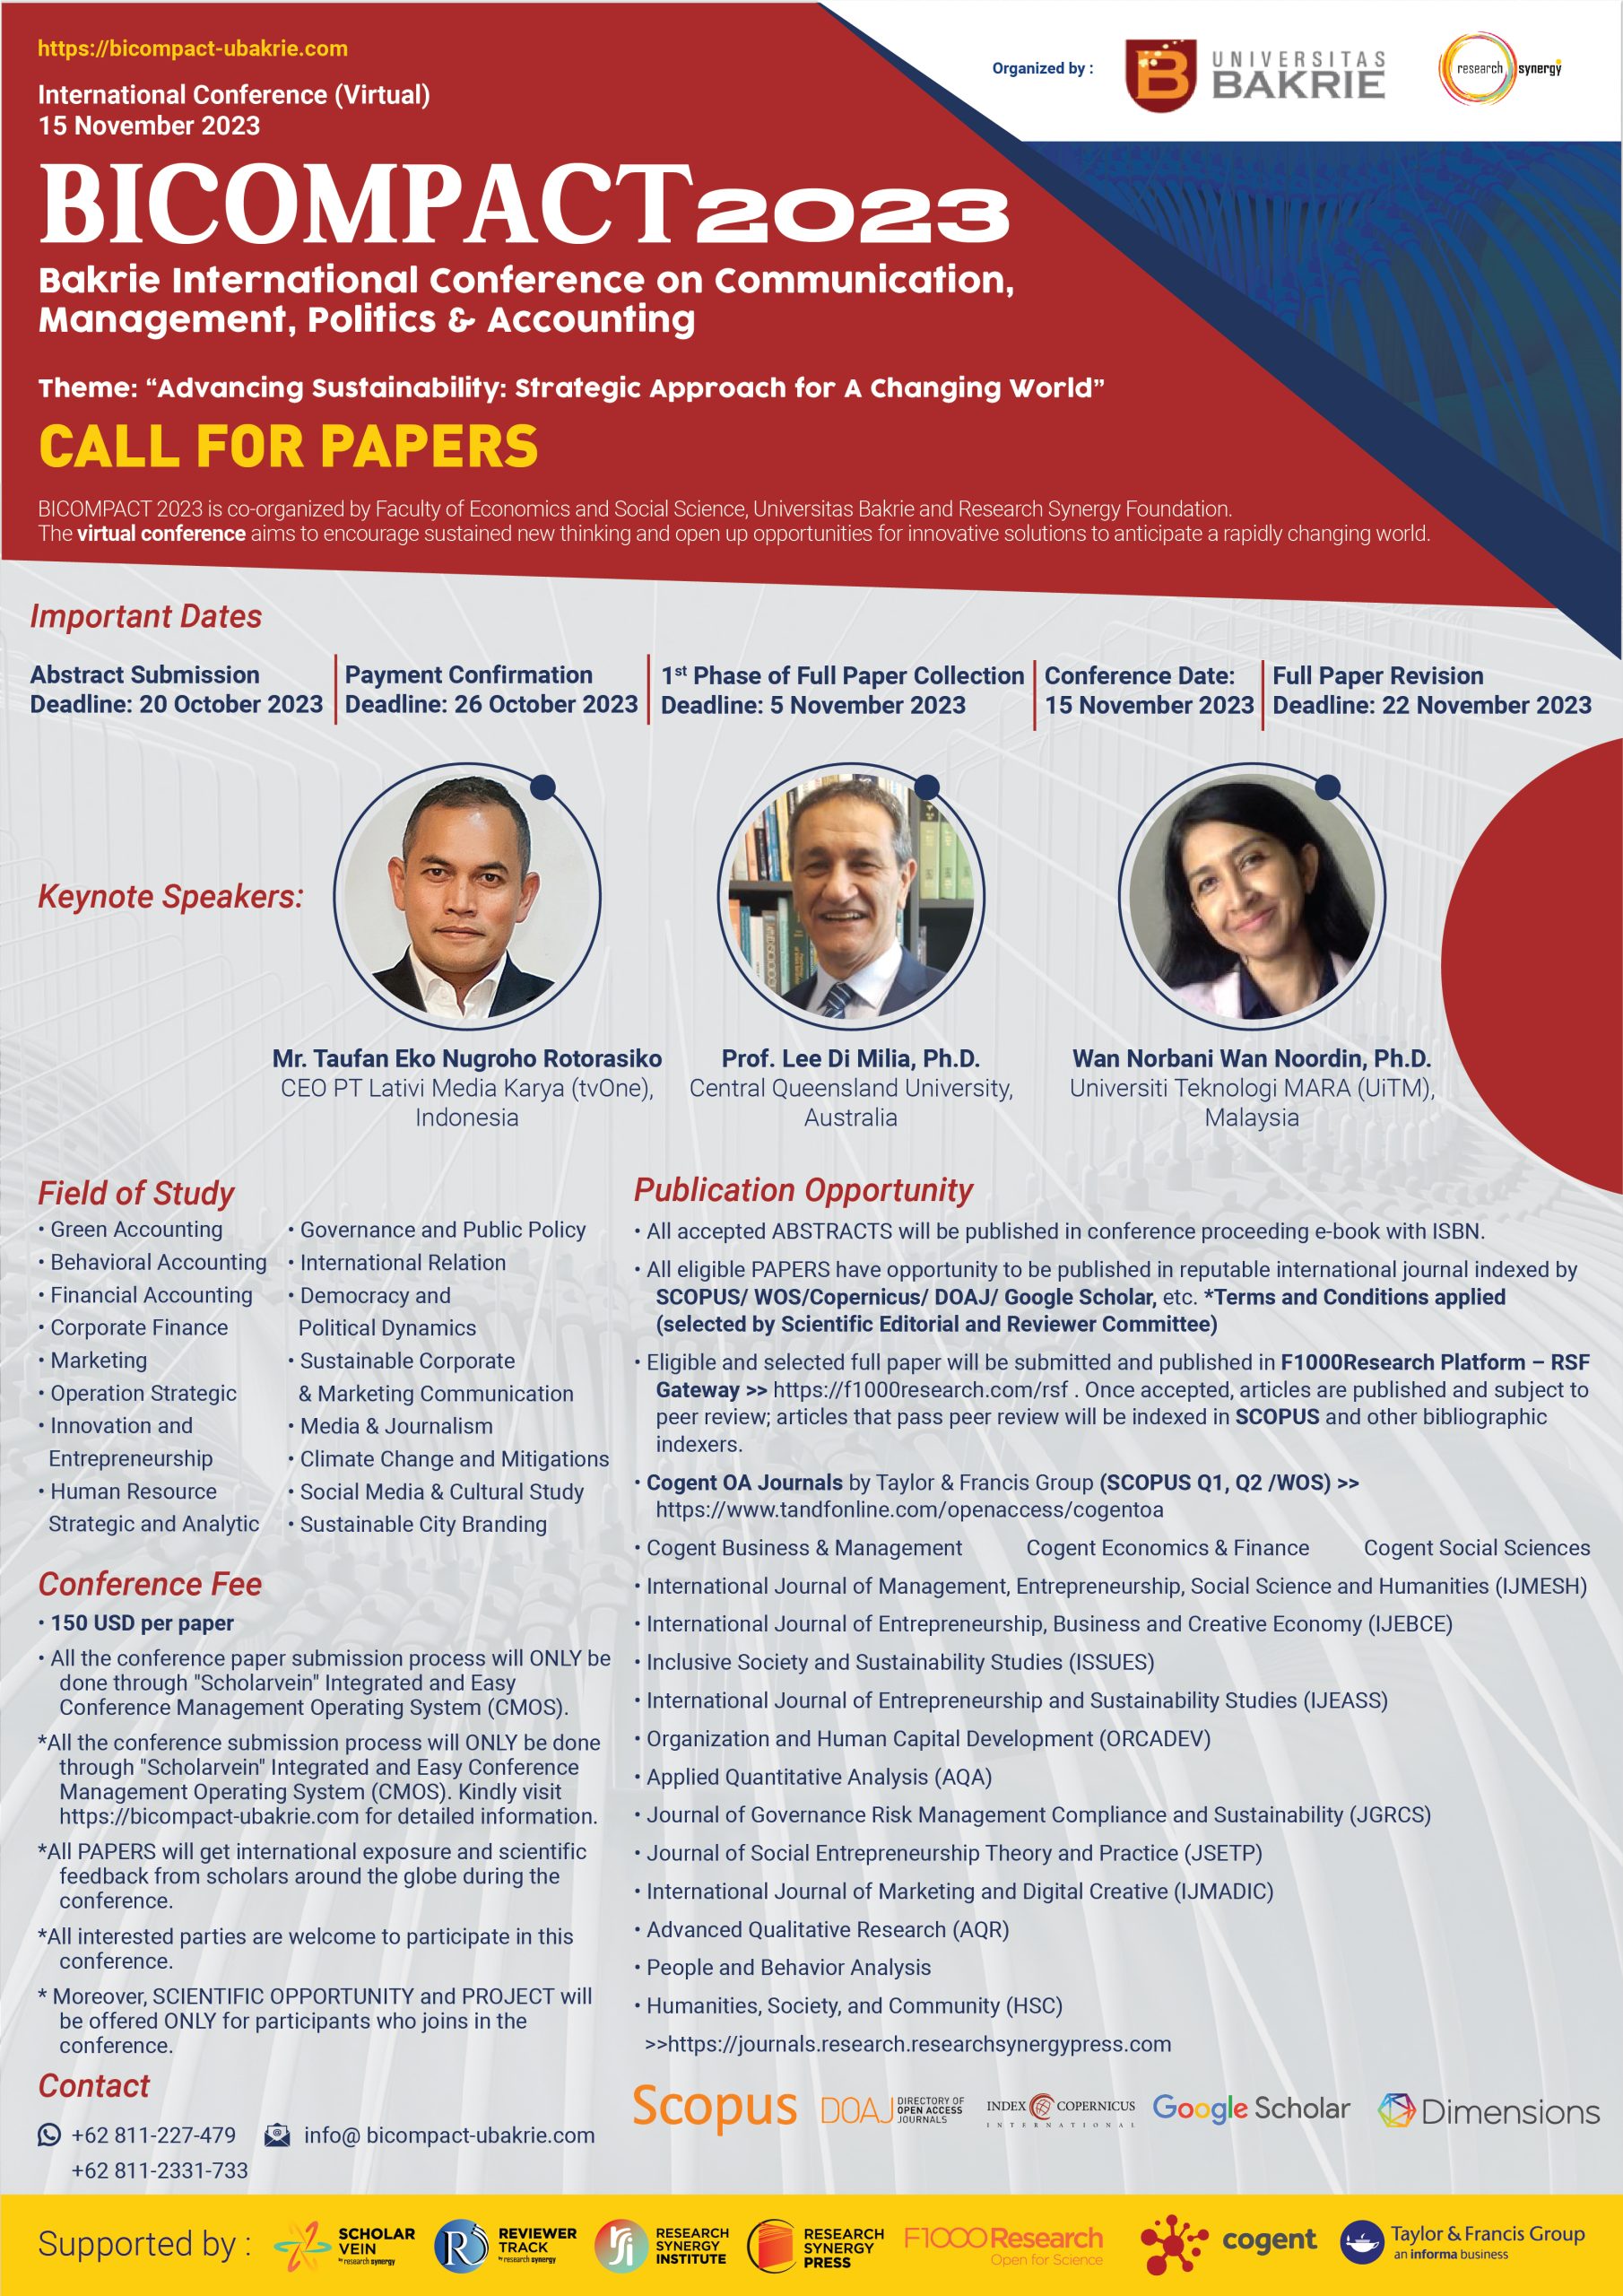 Bakrie International Conference on Communication, Management, Politics & Accounting (BICOMPACT 2023)